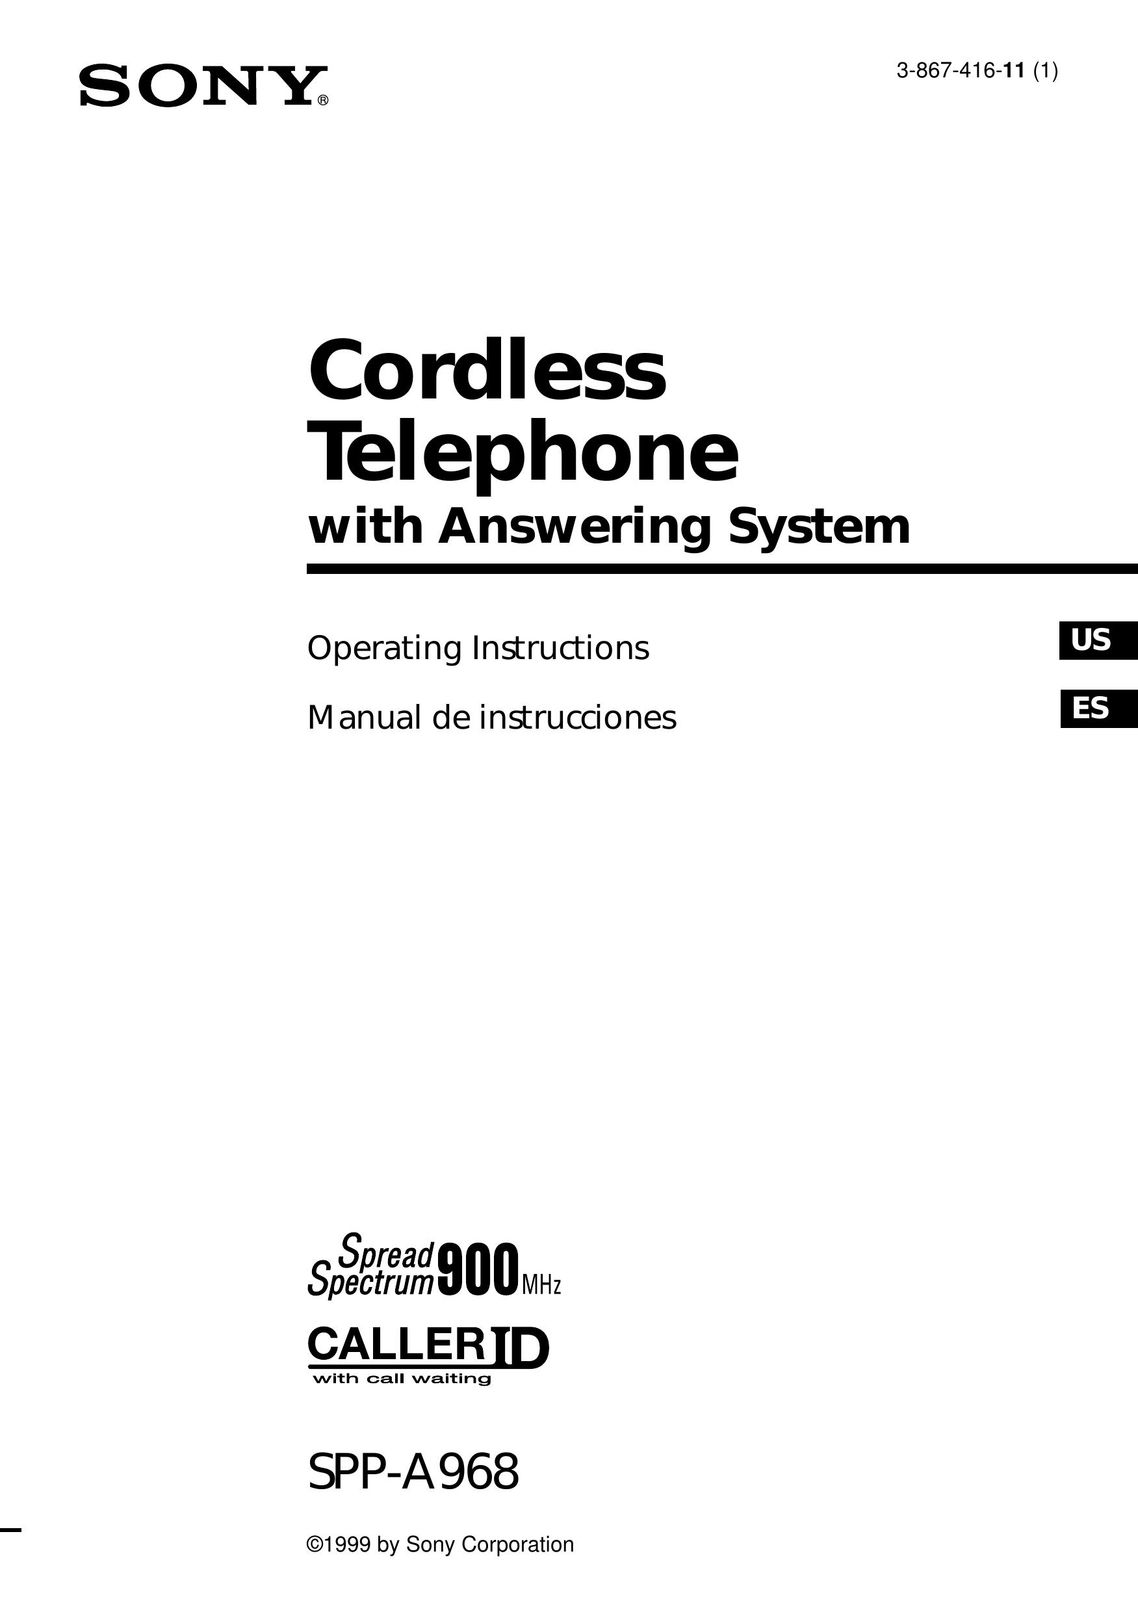 Sony SPP-A968 Cordless Telephone User Manual